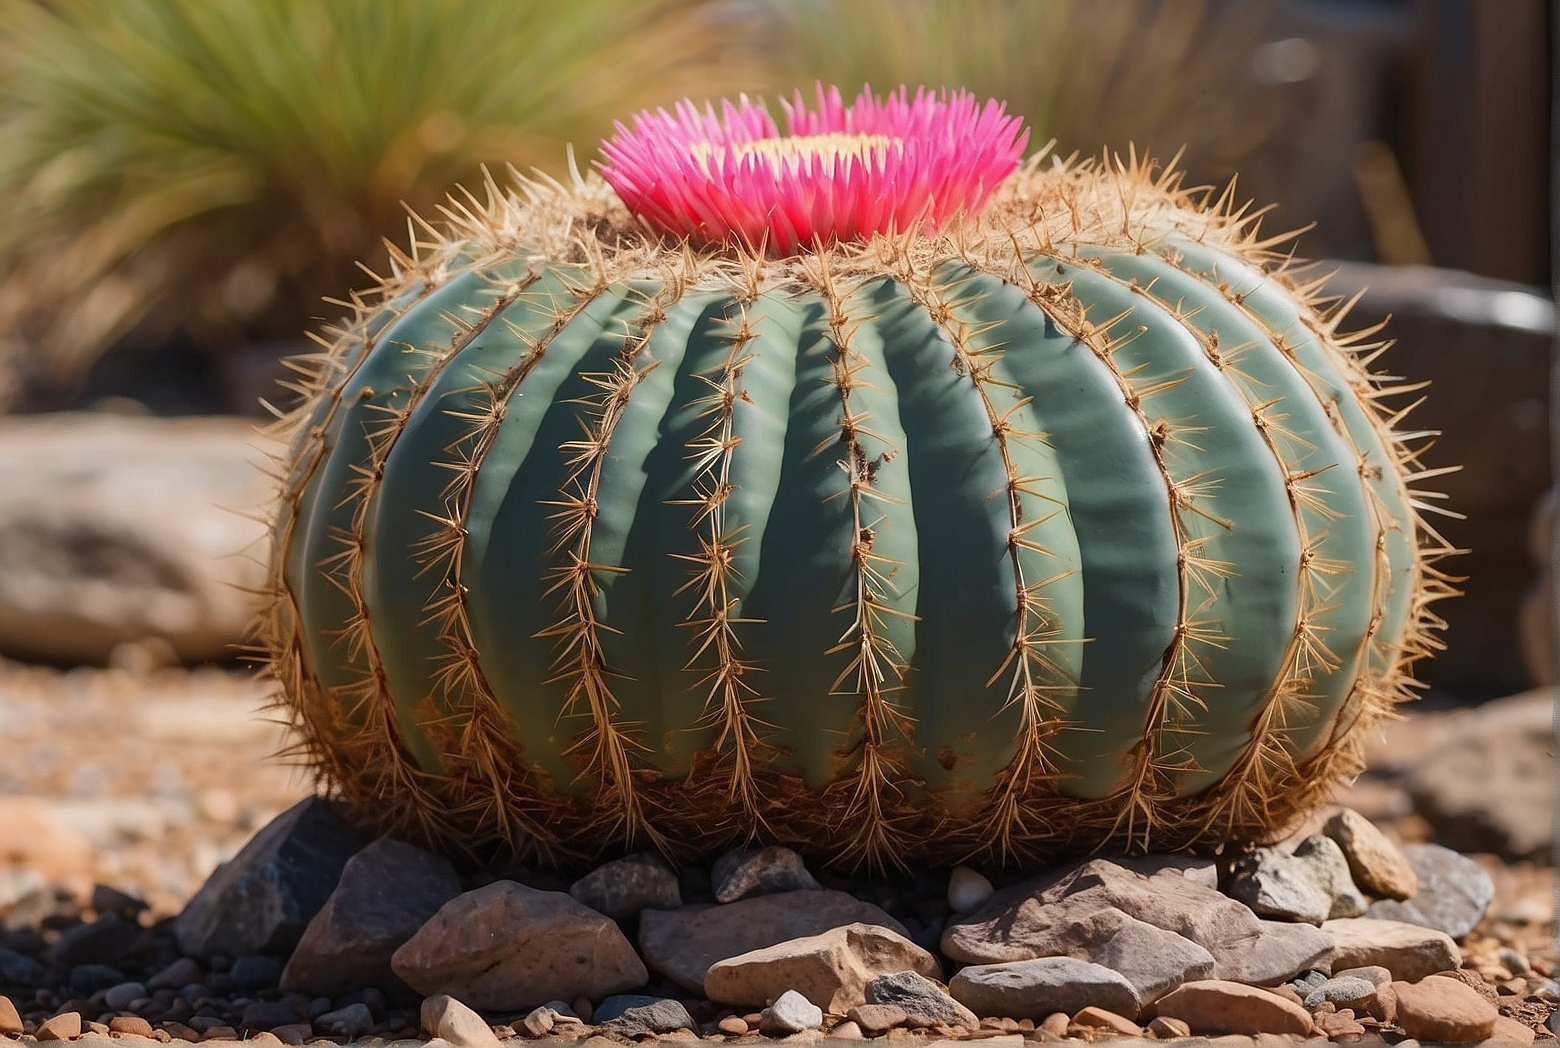 A Step-by-Step Guide to Planting a Barrel Cactus